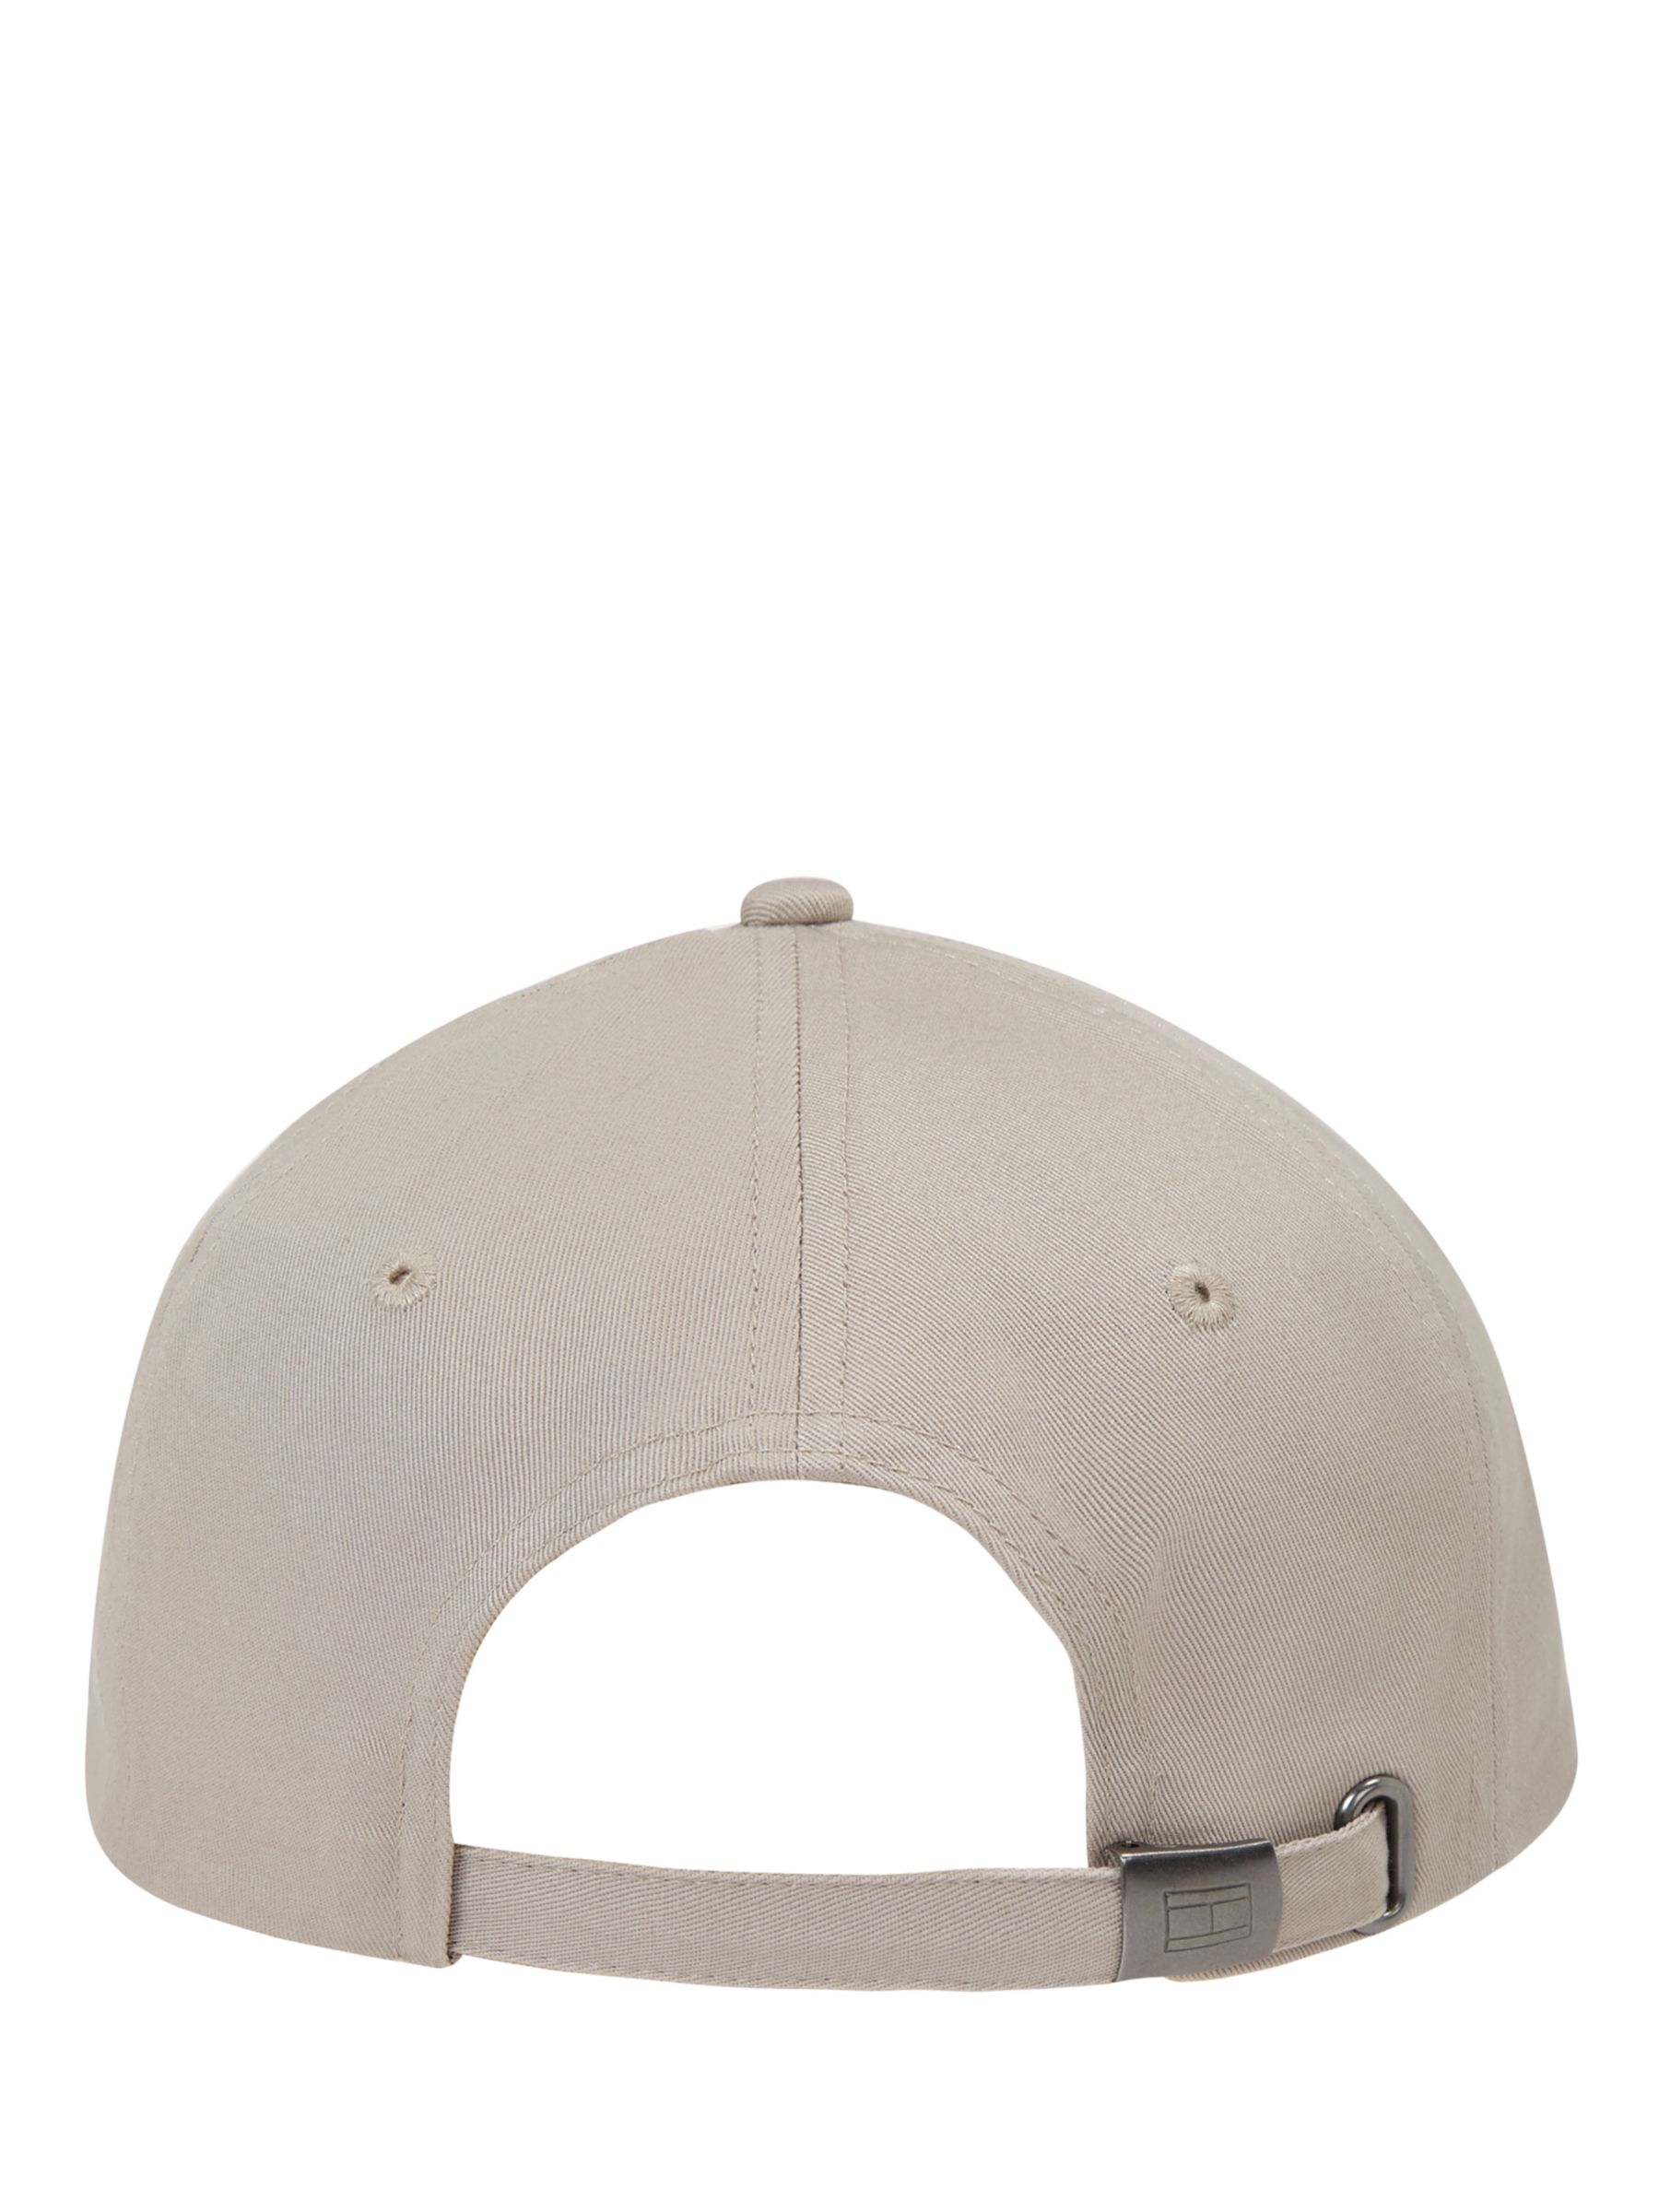 Tommy Hilfiger Organic Cotton Corporate Baseball Cap, Taupe, One Size